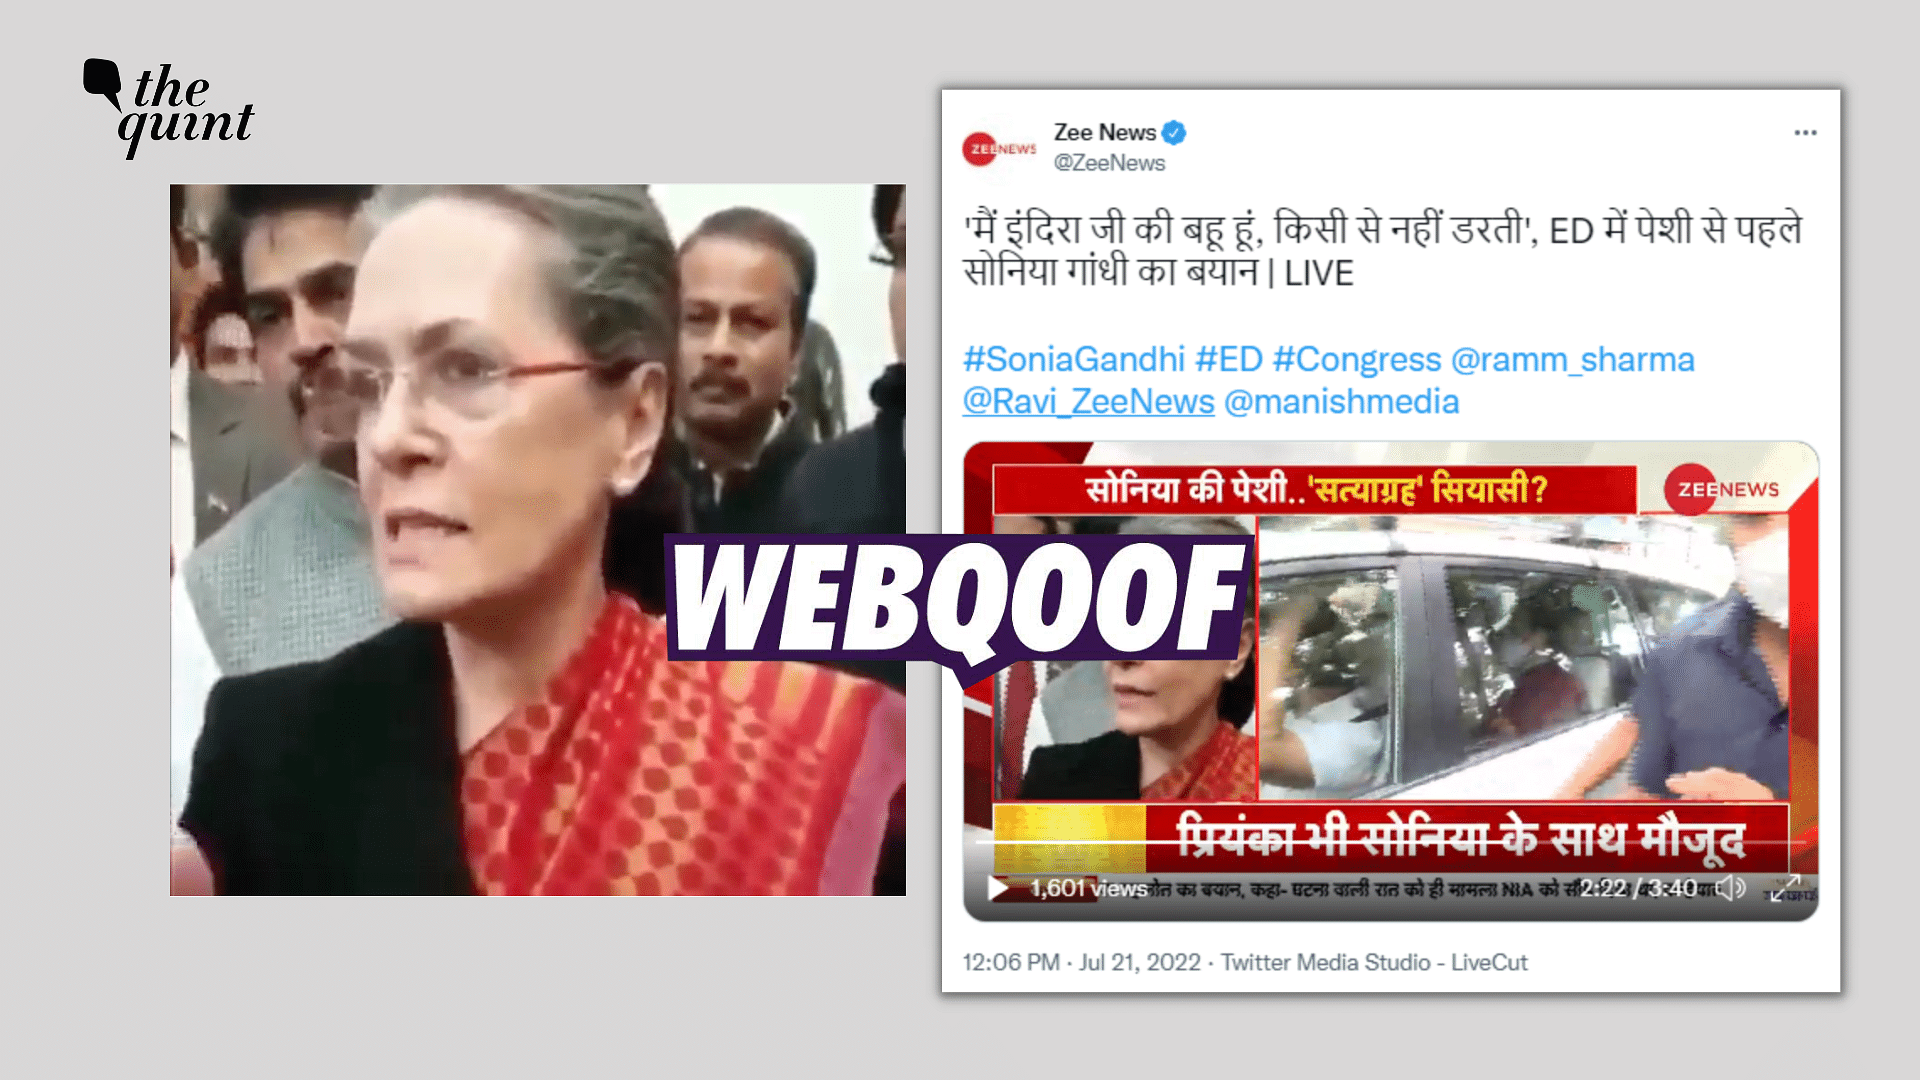 <div class="paragraphs"><p>Fact-check: The claim states that Sonia Gandhi said that she is Indira Gandhi's daughter-in-law and not afraid of anyone before ED questioned her.</p></div>